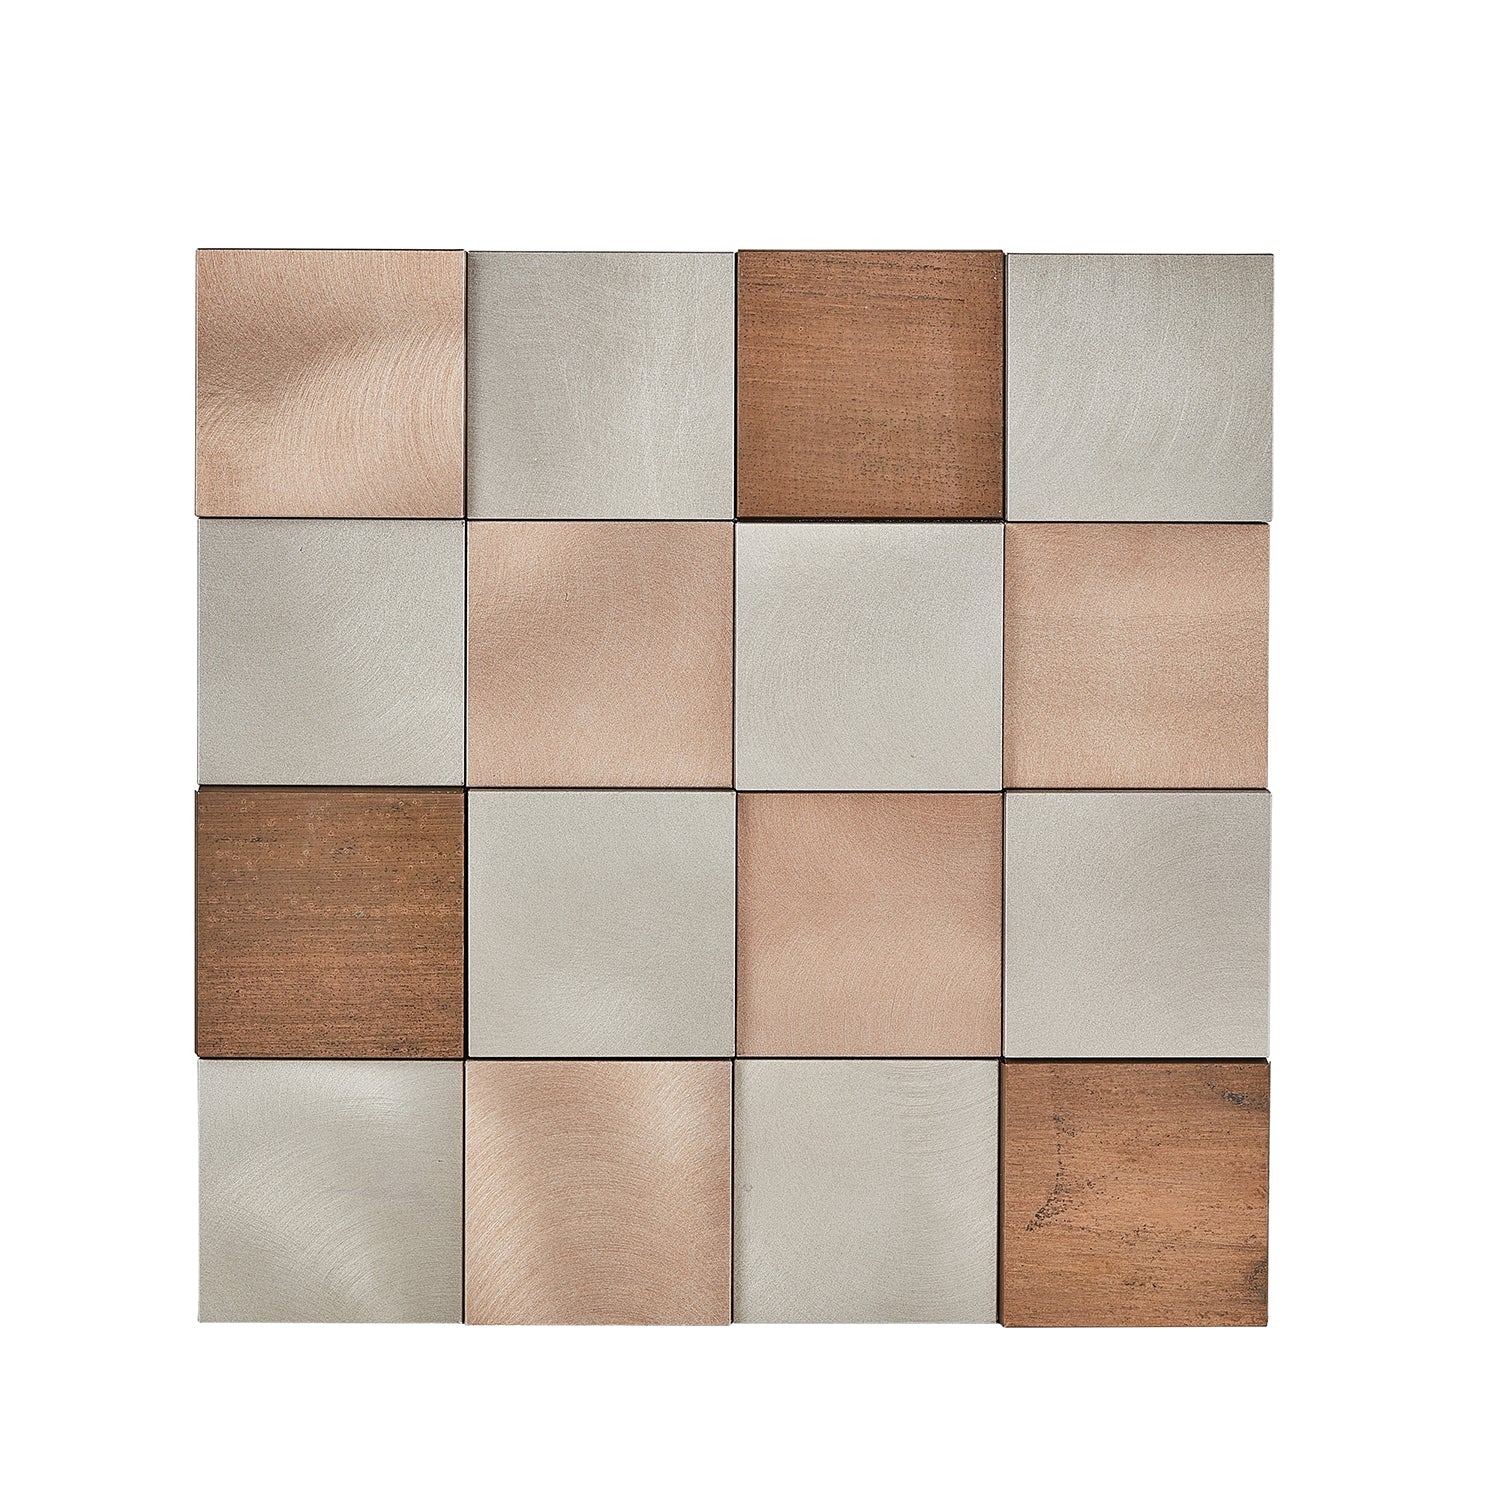 Mijas Peel-and-Stick Mosaic Tile in Copper